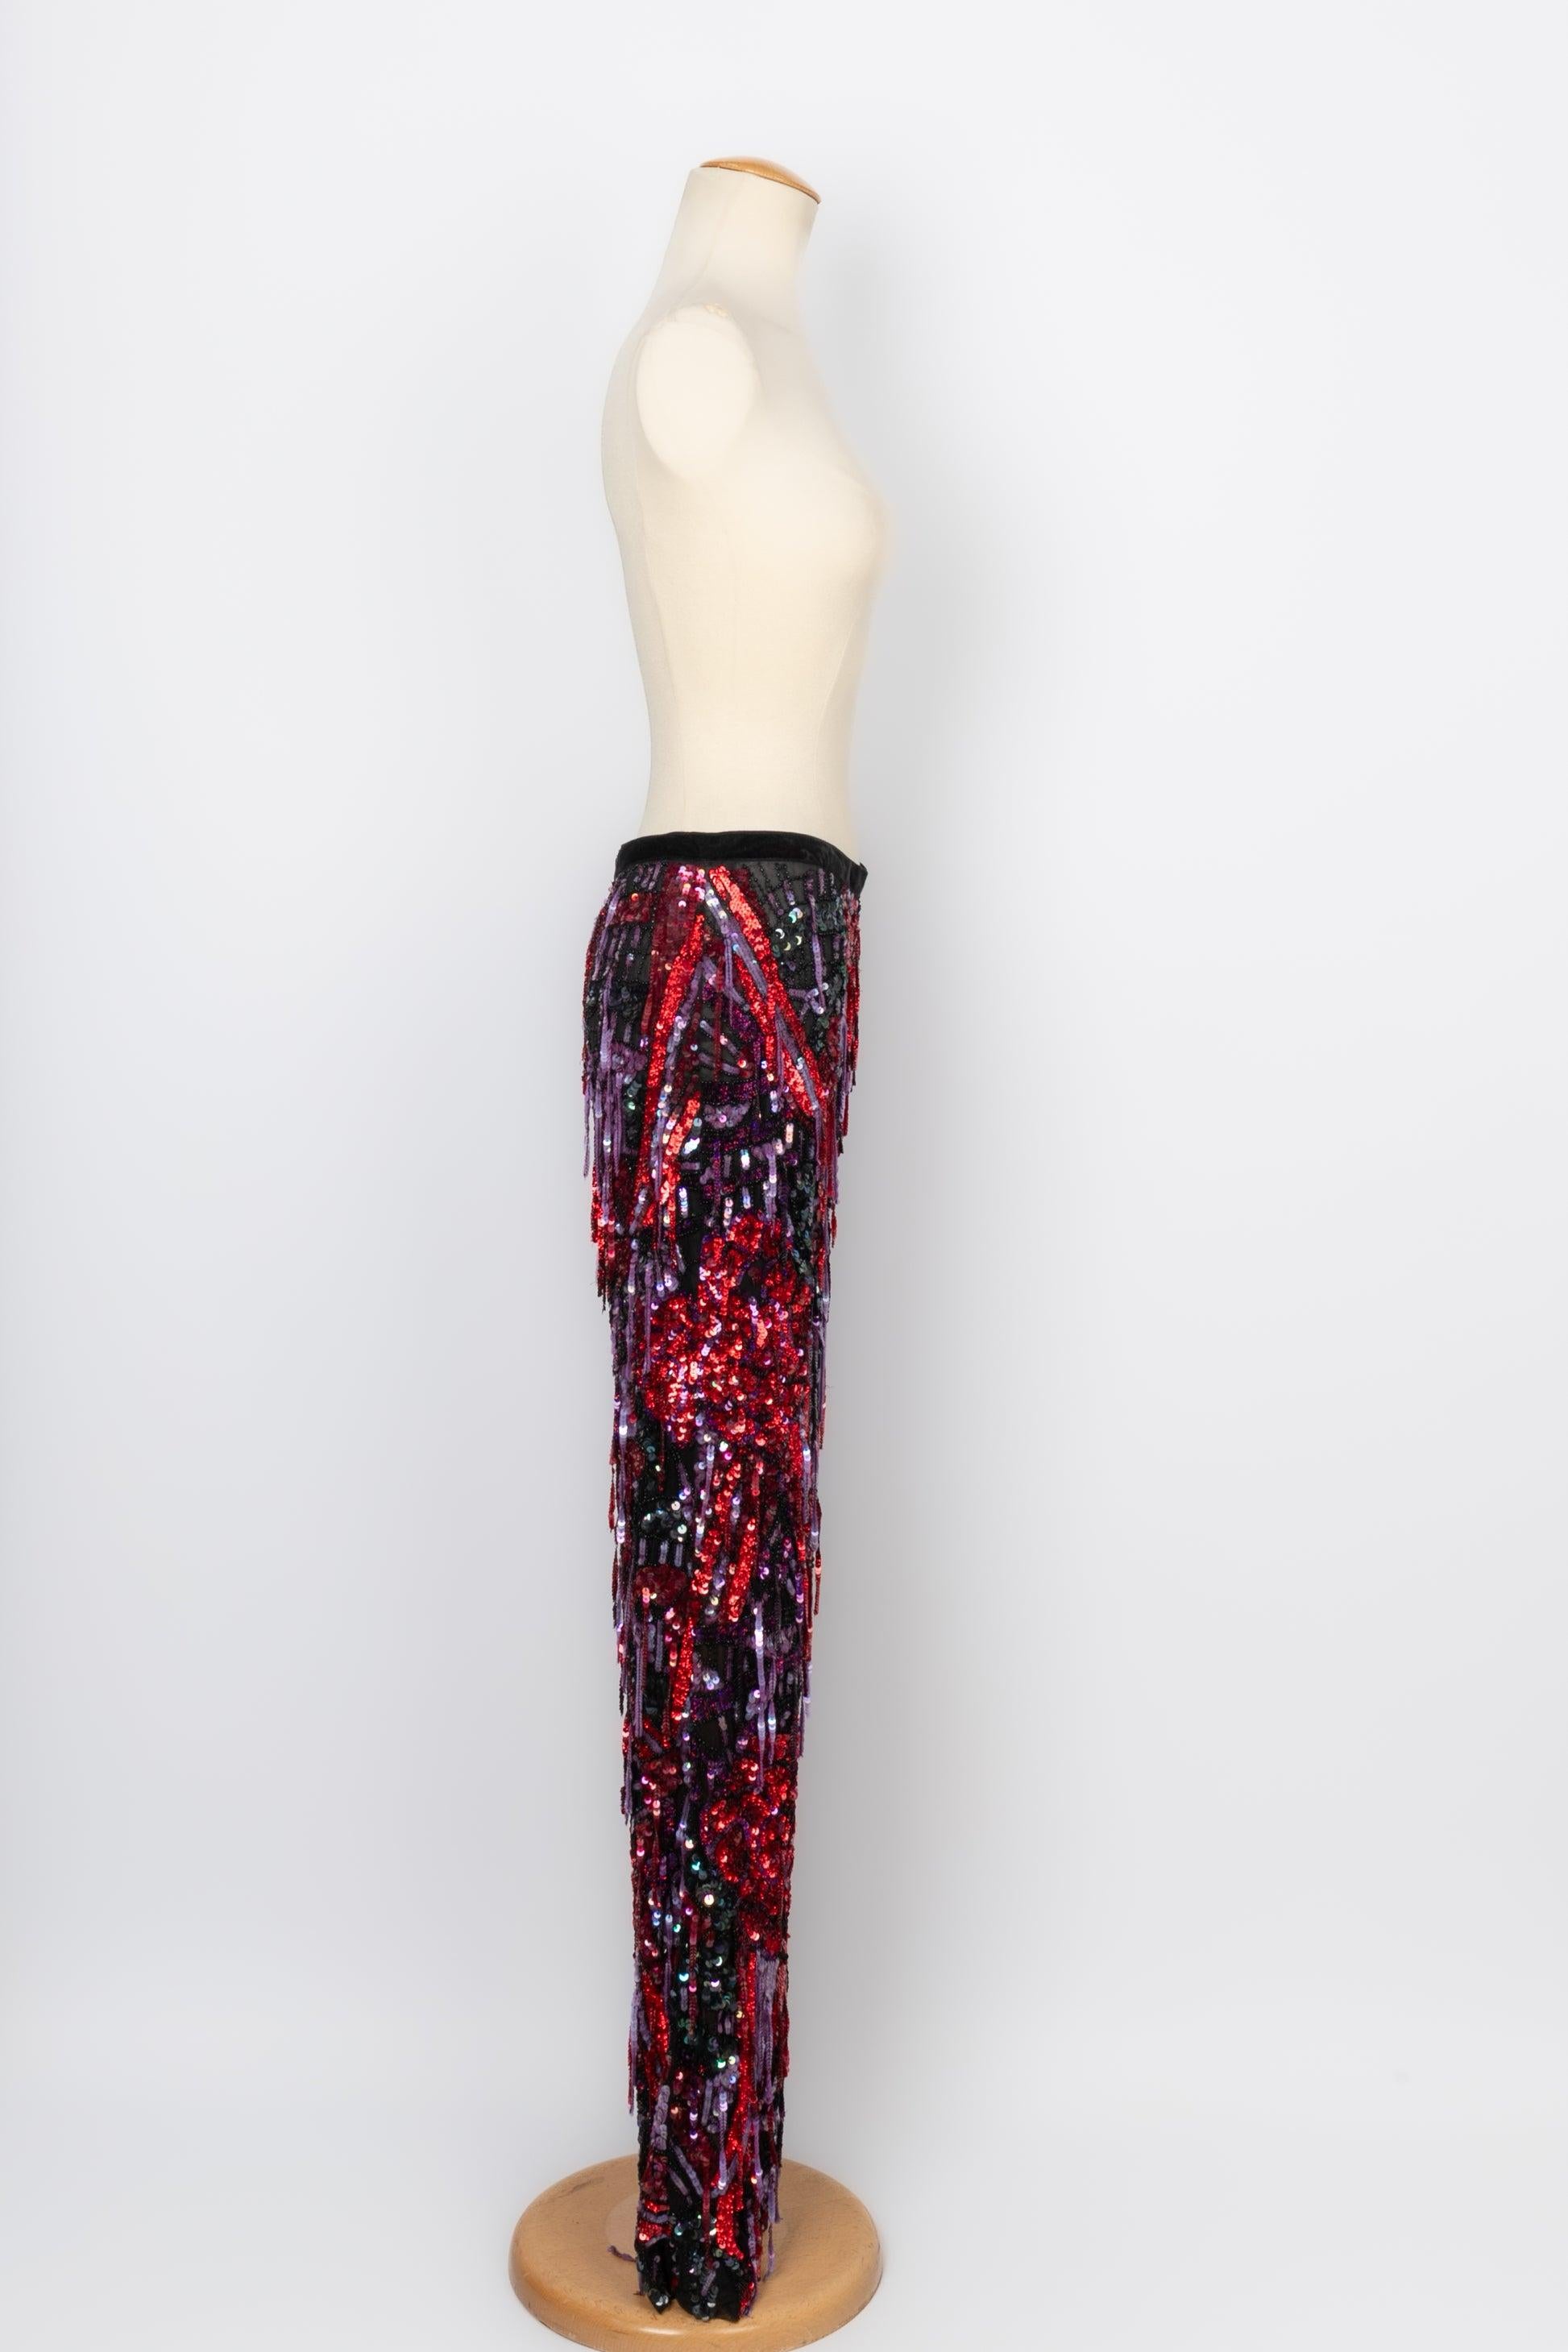 Christian Lacroix - Black tulle pants entirely embroidered with sequins. No size indicated, it fits a 34FR/36 FR.

Additional information: 
Condition: Very good condition
Dimensions: Waist: 35 cm - Hips: 45 cm - Length: 114 cm
 
Seller Reference: